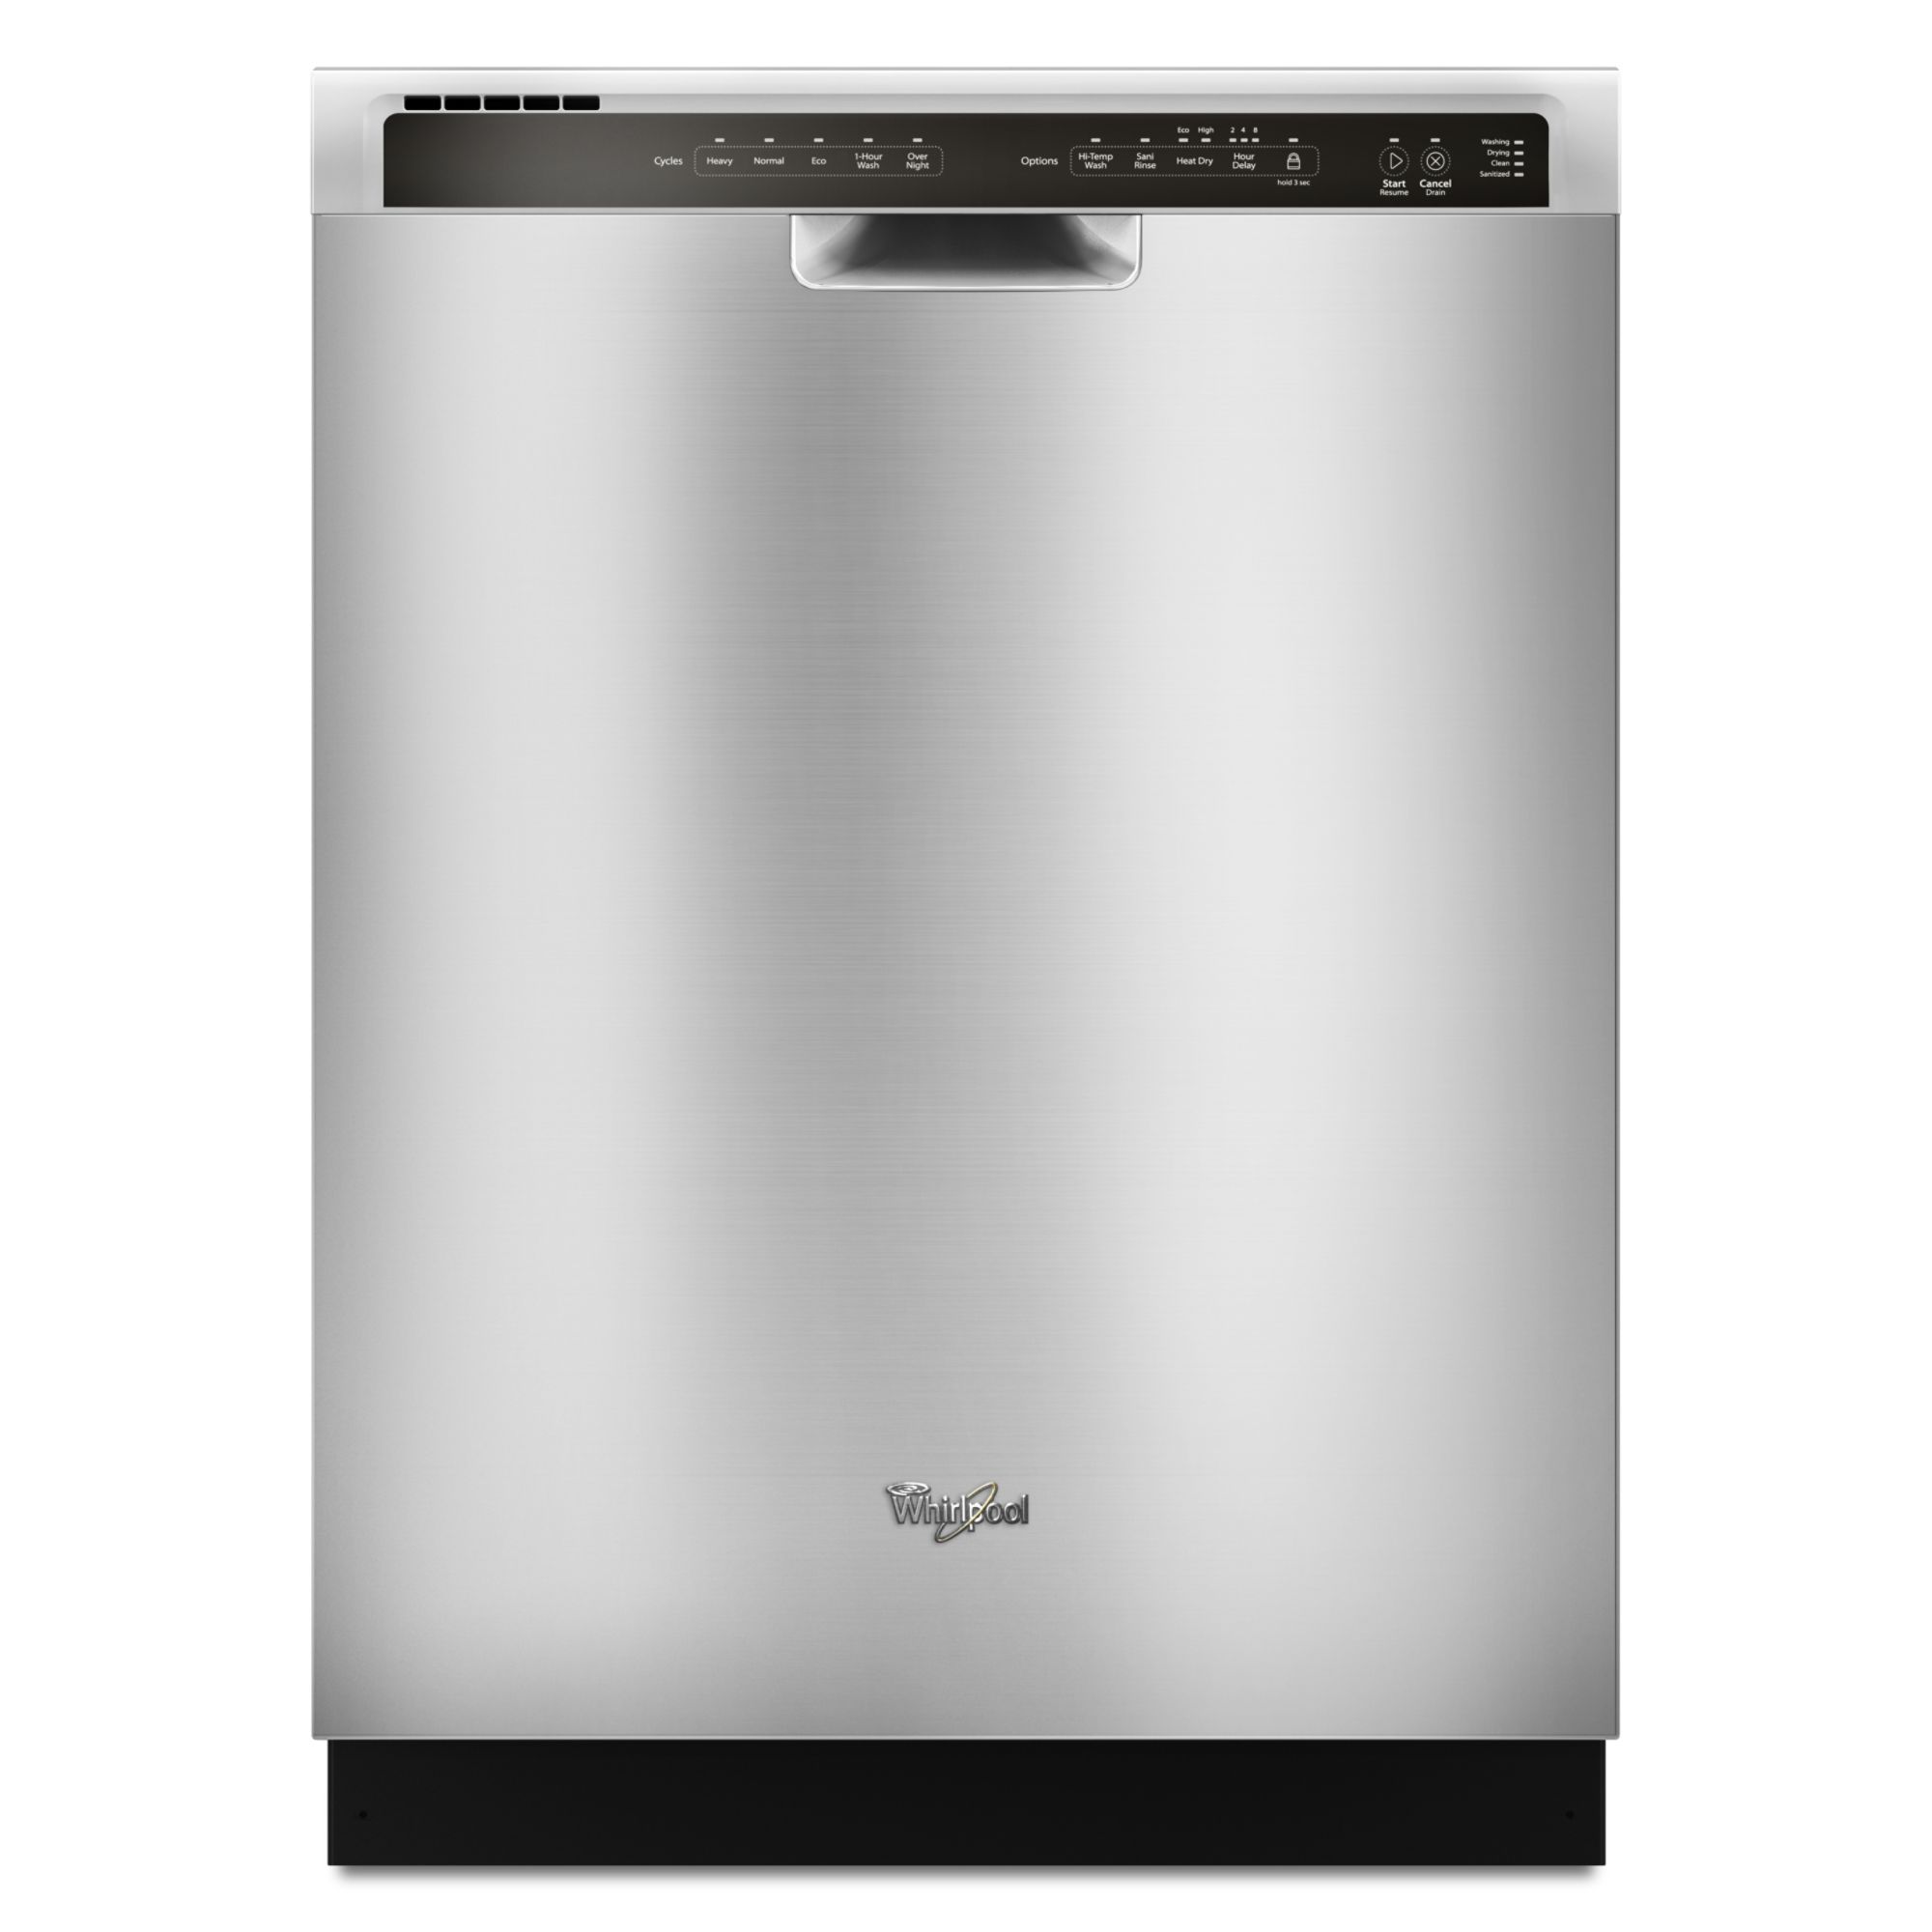 Whirlpool WDF530PAYM 24" Built-In Dishwasher w/ Resource-Efficient Wash System - Stainless Steel